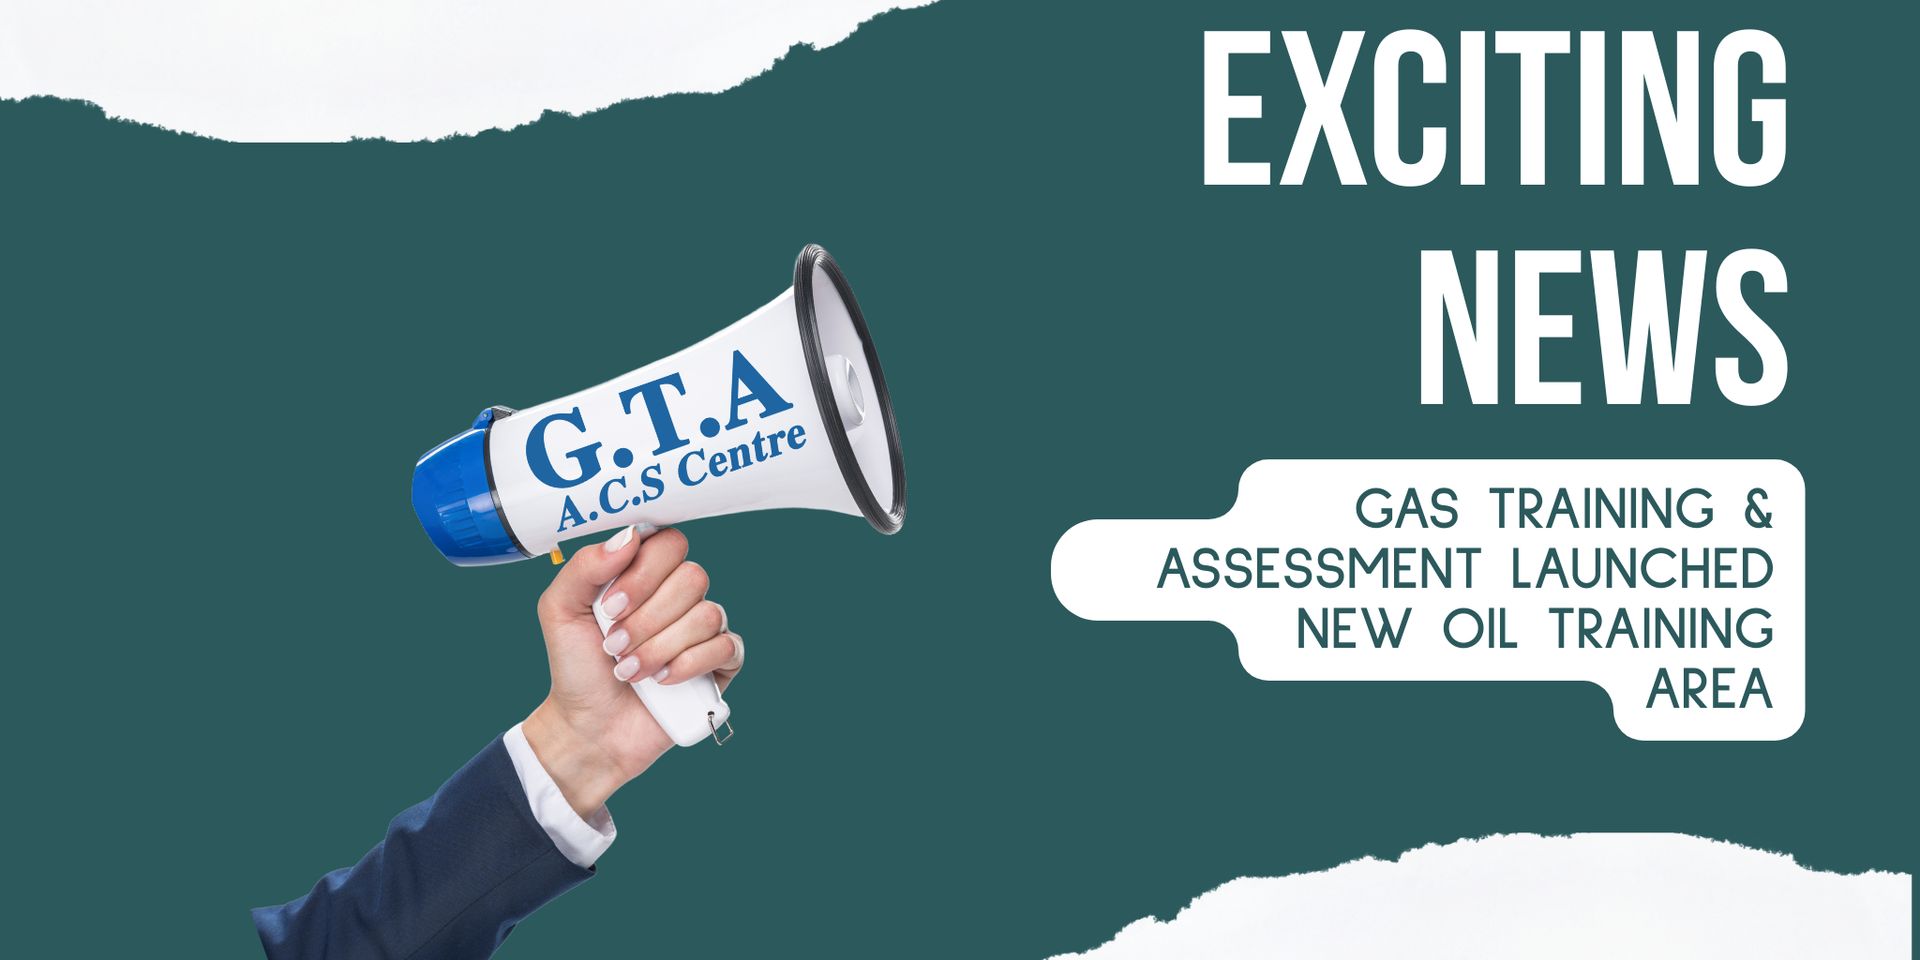 Exciting News: Gas Training & Assessment Launched New Oil Training Area!